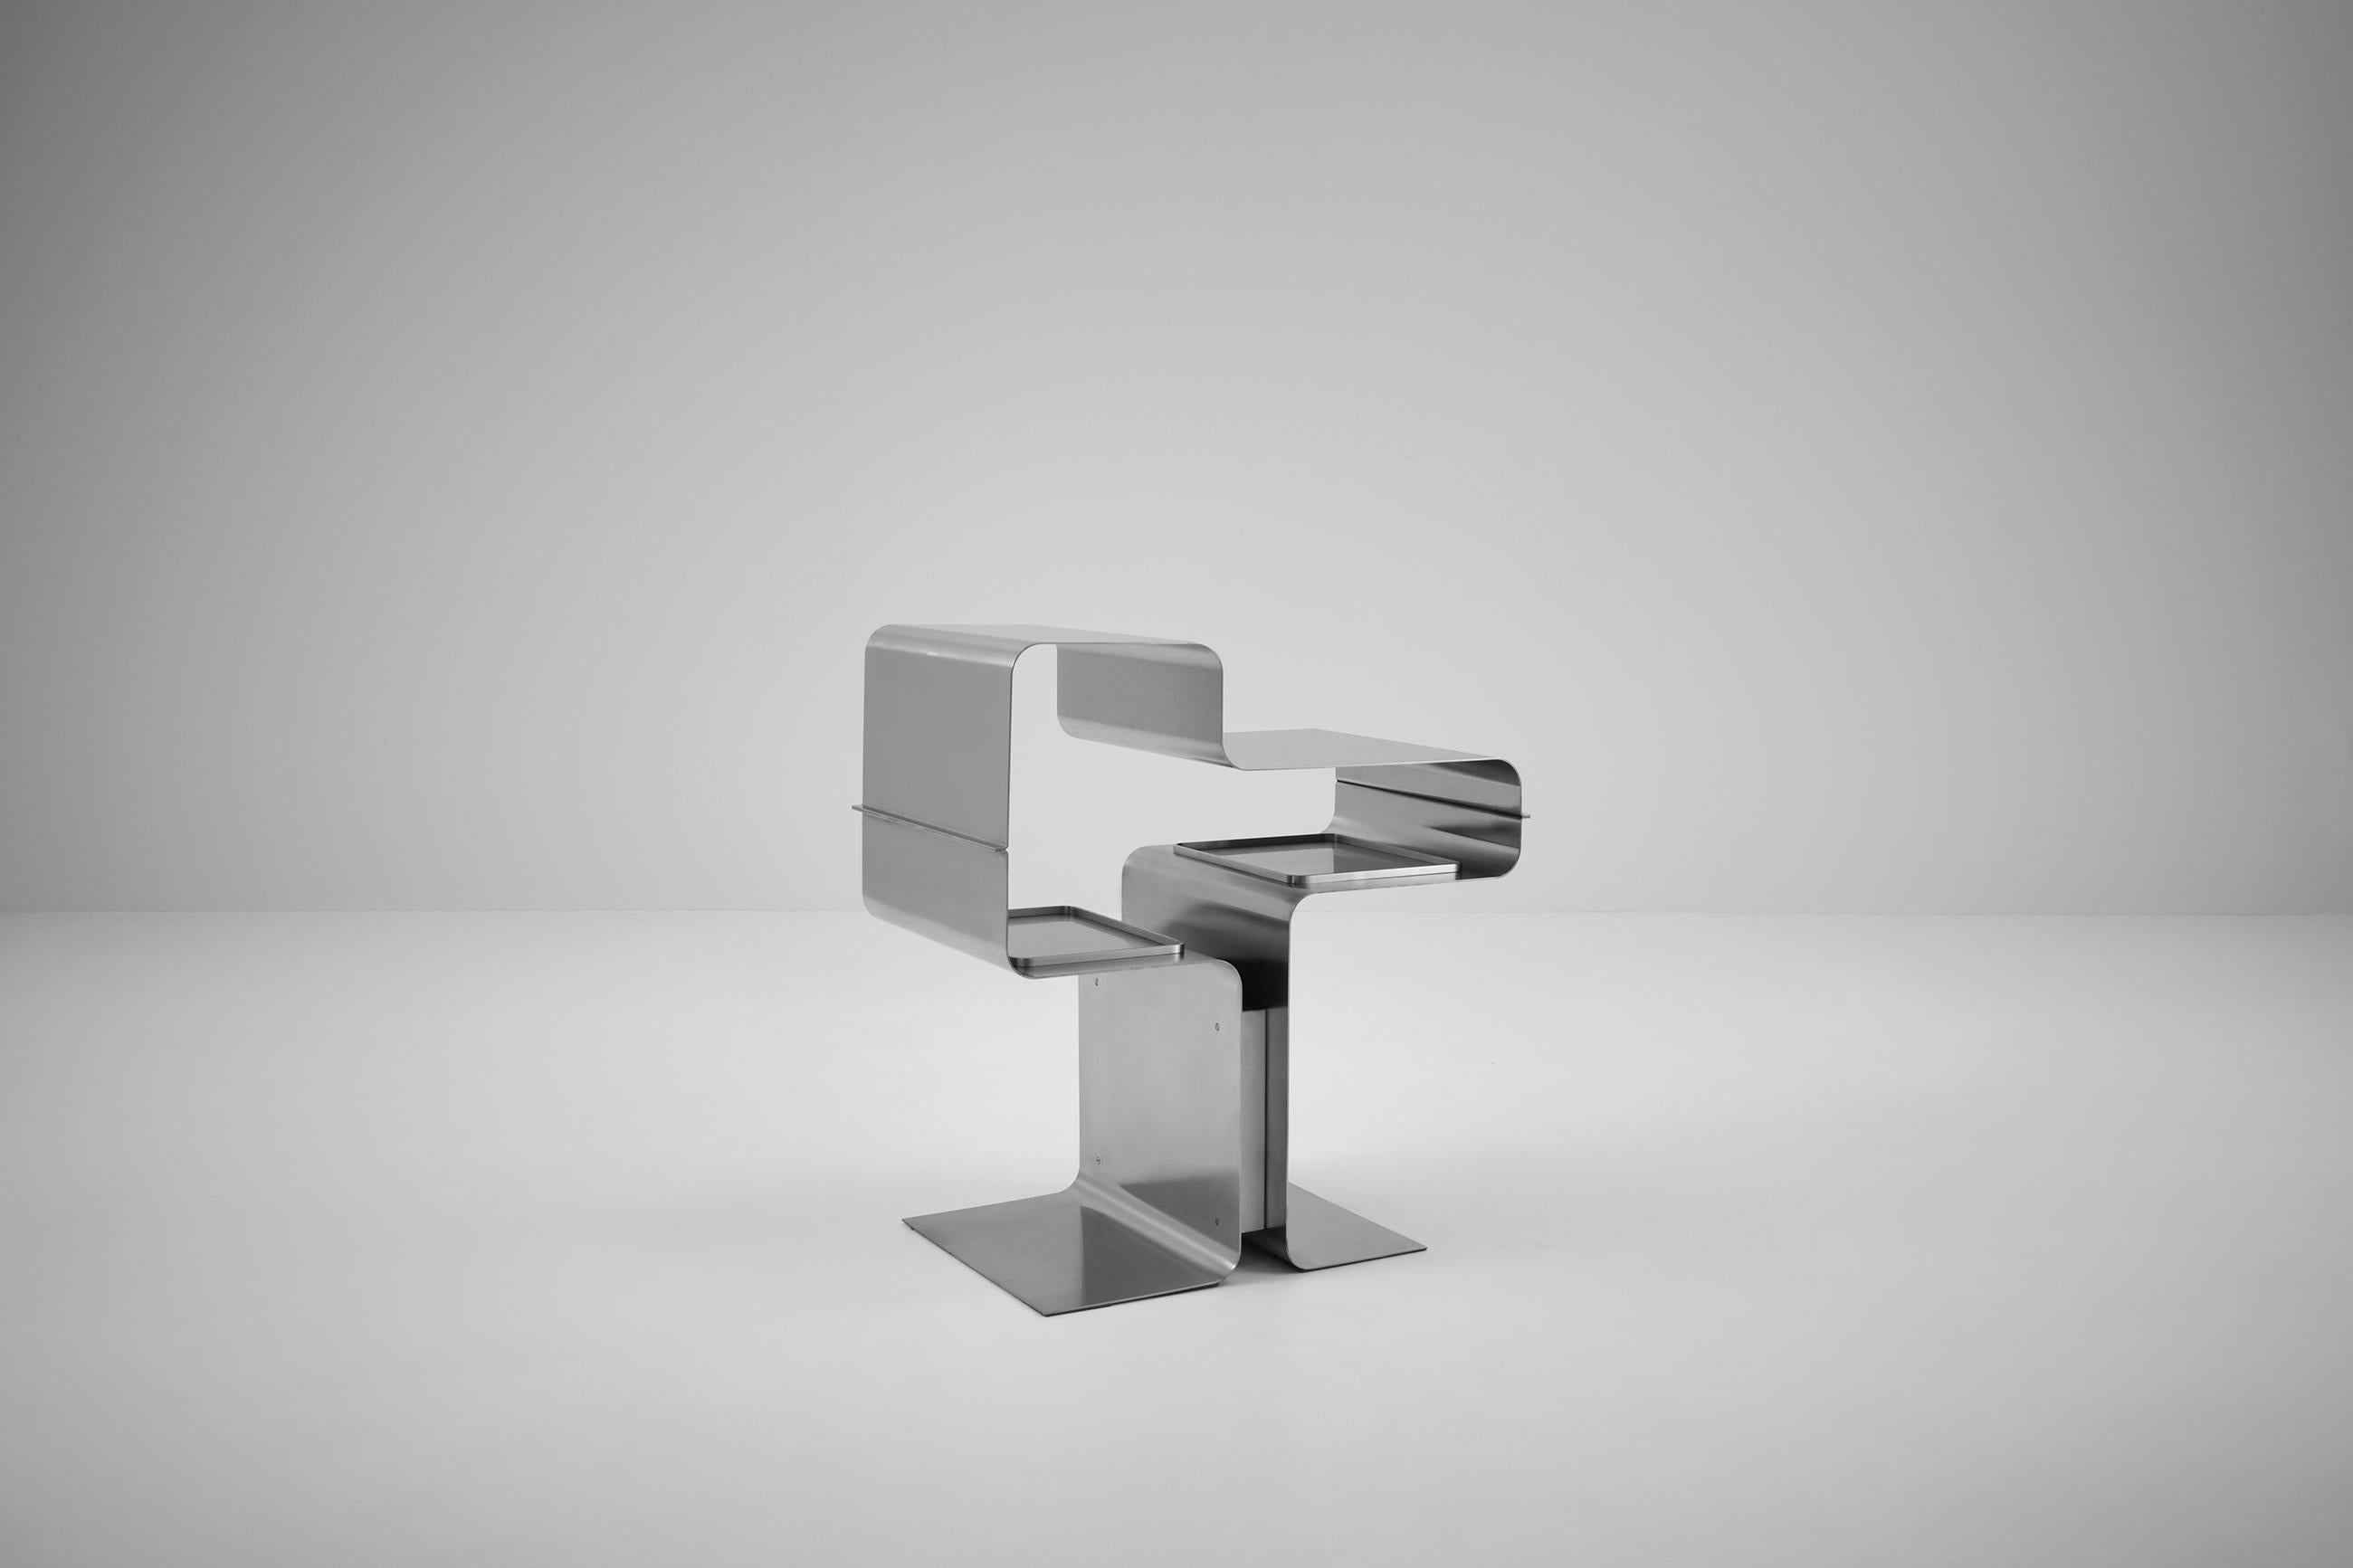 François Monnet console for Kappa, 1970s. Fantastic sculptural design made from folded stainless steel.
The console is cleaned and professionally re-brushed with the preserve of it's original character, therefore in a very good condition without